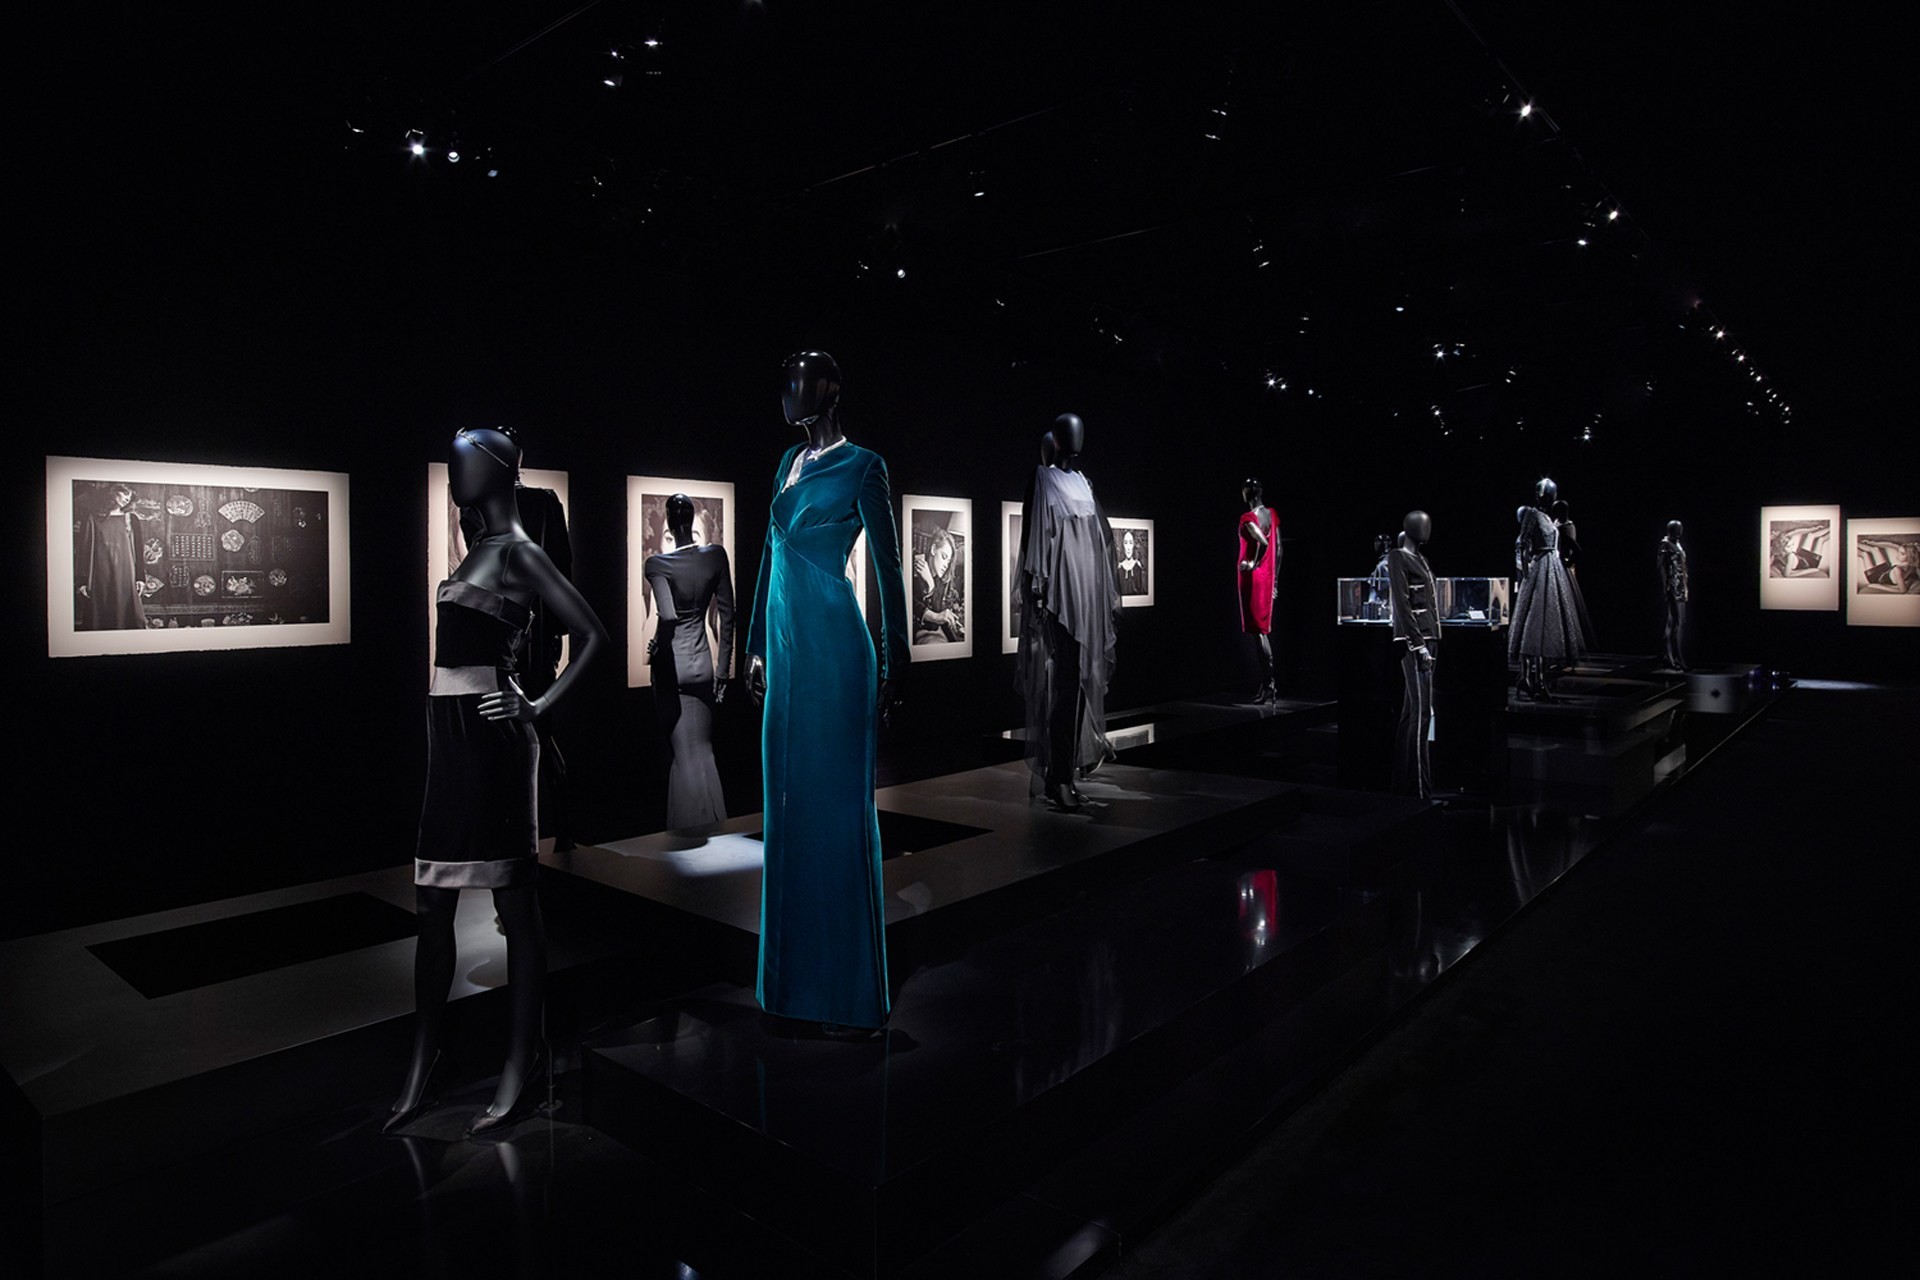 A display of Chanel eveningwear at the Saatchi Gallery's 